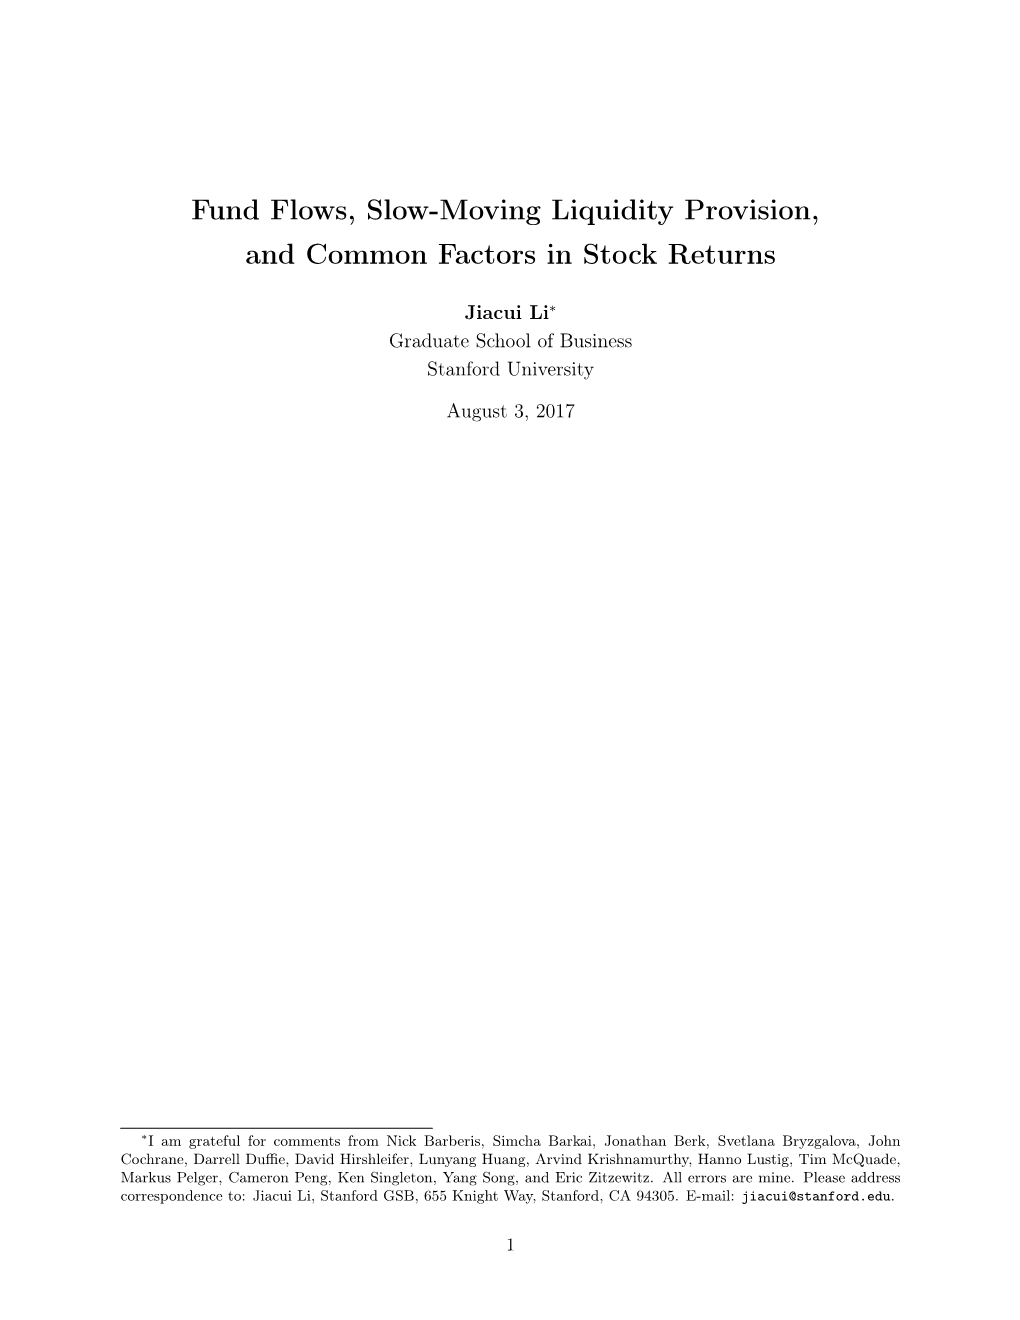 Fund Flows, Slow-Moving Liquidity Provision, and Common Factors in Stock Returns